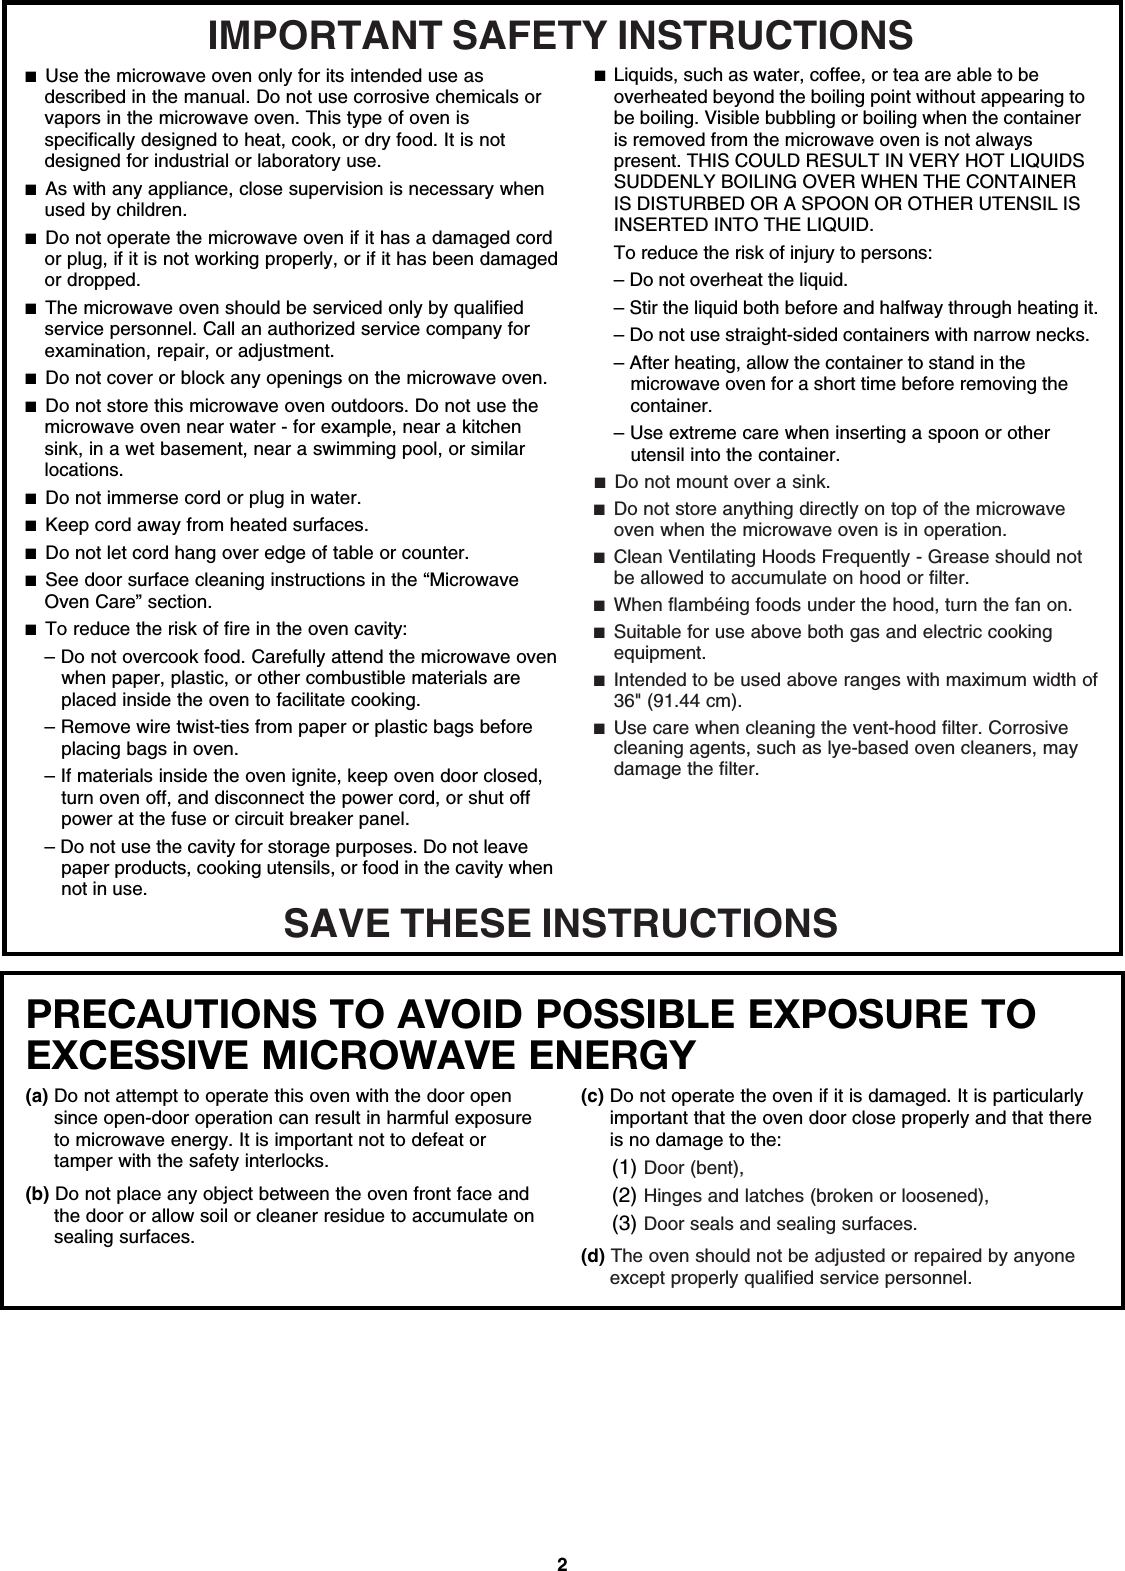 2PRECAUTIONS TO AVOID POSSIBLE EXPOSURE TO EXCESSIVE MICROWAVE ENERGY (a) Do not attempt to operate this oven with the door open since open-door operation can result in harmful exposure to microwave energy. It is important not to defeat or tamper with the safety interlocks.(b) Do not place any object between the oven front face and the door or allow soil or cleaner residue to accumulate on sealing surfaces.(c) Do not operate the oven if it is damaged. It is particularly important that the oven door close properly and that there is no damage to the:(1) Door (bent),(2) Hinges and latches (broken or loosened),(3) Door seals and sealing surfaces.  (d) The oven should not be adjusted or repaired by anyone except properly qualified service personnel.IMPORTANT SAFETY INSTRUCTIONSSAVE THESE INSTRUCTIONS■  Use the microwave oven only for its intended use as described in the manual. Do not use corrosive chemicals or vapors in the microwave oven. This type of oven is specifically designed to heat, cook, or dry food. It is not designed for industrial or laboratory use. ■  As with any appliance, close supervision is necessary when used by children. ■  Do not operate the microwave oven if it has a damaged cord or plug, if it is not working properly, or if it has been damaged or dropped.■  The microwave oven should be serviced only by qualified service personnel. Call an authorized service company for examination, repair, or adjustment. ■  Do not cover or block any openings on the microwave oven. ■  Do not store this microwave oven outdoors. Do not use the microwave oven near water - for example, near a kitchen sink, in a wet basement, near a swimming pool, or similar locations.■  Do not immerse cord or plug in water. ■  Keep cord away from heated surfaces. ■  Do not let cord hang over edge of table or counter. ■  See door surface cleaning instructions in the “Microwave Oven Care” section.■  To reduce the risk of fire in the oven cavity:– Do not overcook food. Carefully attend the microwave oven when paper, plastic, or other combustible materials are placed inside the oven to facilitate cooking. – Remove wire twist-ties from paper or plastic bags before placing bags in oven.– If materials inside the oven ignite, keep oven door closed, turn oven off, and disconnect the power cord, or shut off power at the fuse or circuit breaker panel.– Do not use the cavity for storage purposes. Do not leave paper products, cooking utensils, or food in the cavity when not in use.■  Liquids, such as water, coffee, or tea are able to be overheated beyond the boiling point without appearing to be boiling. Visible bubbling or boiling when the container is removed from the microwave oven is not always present. THIS COULD RESULT IN VERY HOT LIQUIDS SUDDENLY BOILING OVER WHEN THE CONTAINER IS DISTURBED OR A SPOON OR OTHER UTENSIL IS INSERTED INTO THE LIQUID. To reduce the risk of injury to persons:– Do not overheat the liquid.– Stir the liquid both before and halfway through heating it.– Do not use straight-sided containers with narrow necks.– After heating, allow the container to stand in the microwave oven for a short time before removing the container.– Use extreme care when inserting a spoon or other utensil into the container.■  Do not mount over a sink. ■  Do not store anything directly on top of the microwave oven when the microwave oven is in operation.■  Clean Ventilating Hoods Frequently - Grease should not be allowed to accumulate on hood or filter.  ■  When flambéing foods under the hood, turn the fan on. ■  Suitable for use above both gas and electric cooking equipment.■  Intended to be used above ranges with maximum width of 36&quot; (91.44 cm).■  Use care when cleaning the vent-hood filter. Corrosive cleaning agents, such as lye-based oven cleaners, may damage the filter.